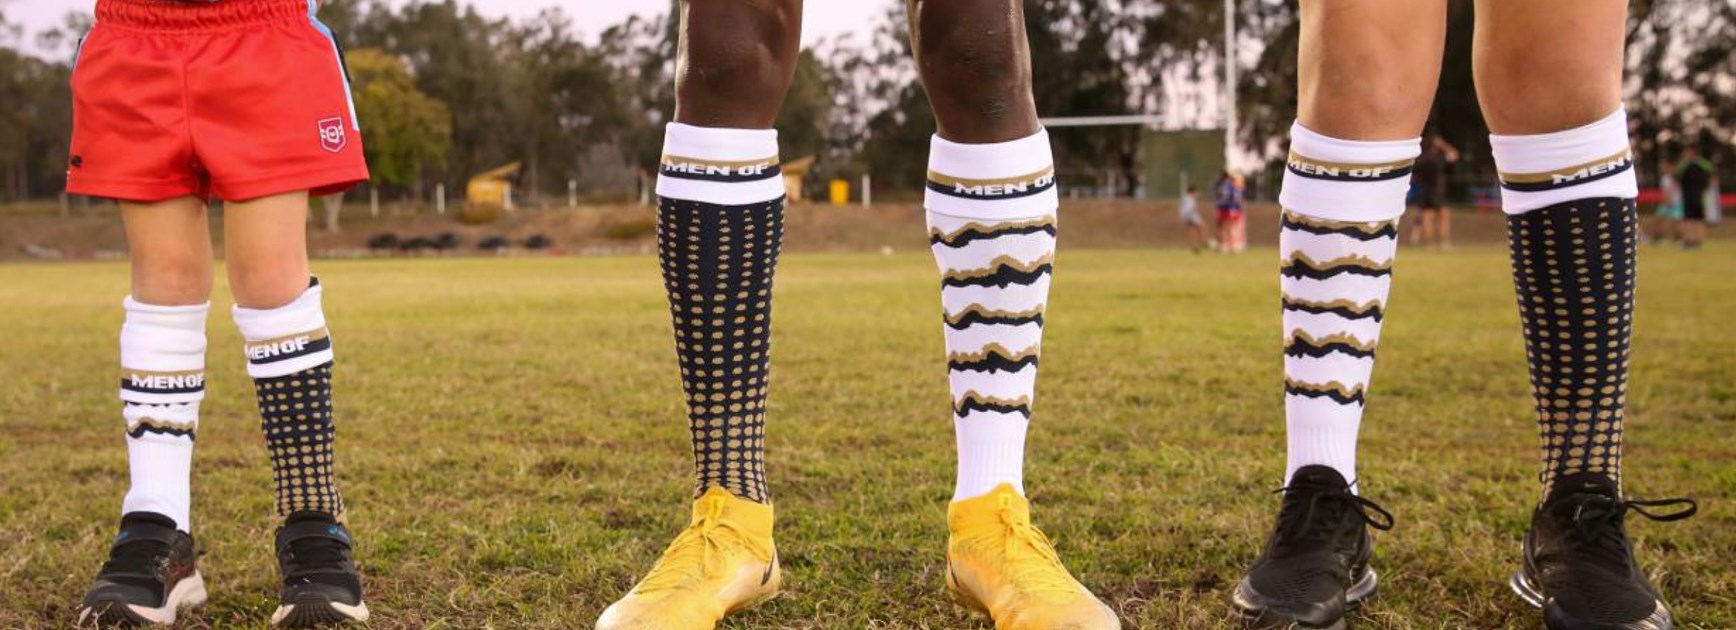 Sock it to 'em: Players give Men of League campaign a leg up